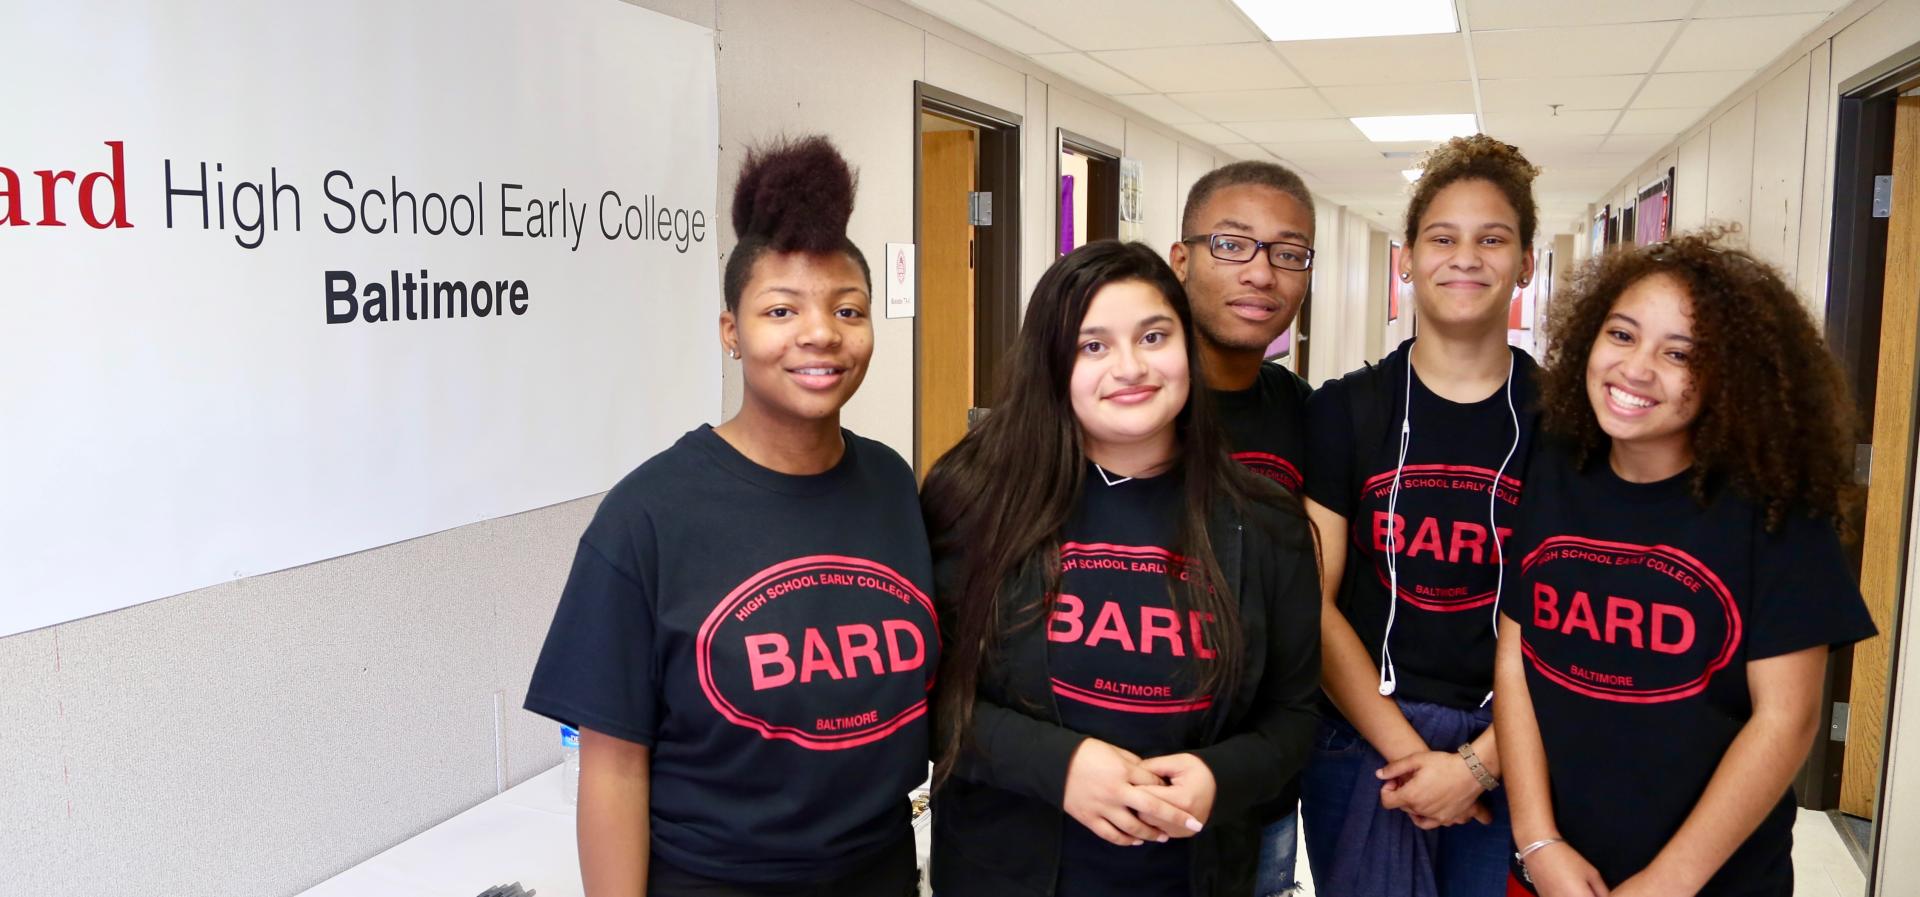 Bard High School Early College Baltimore